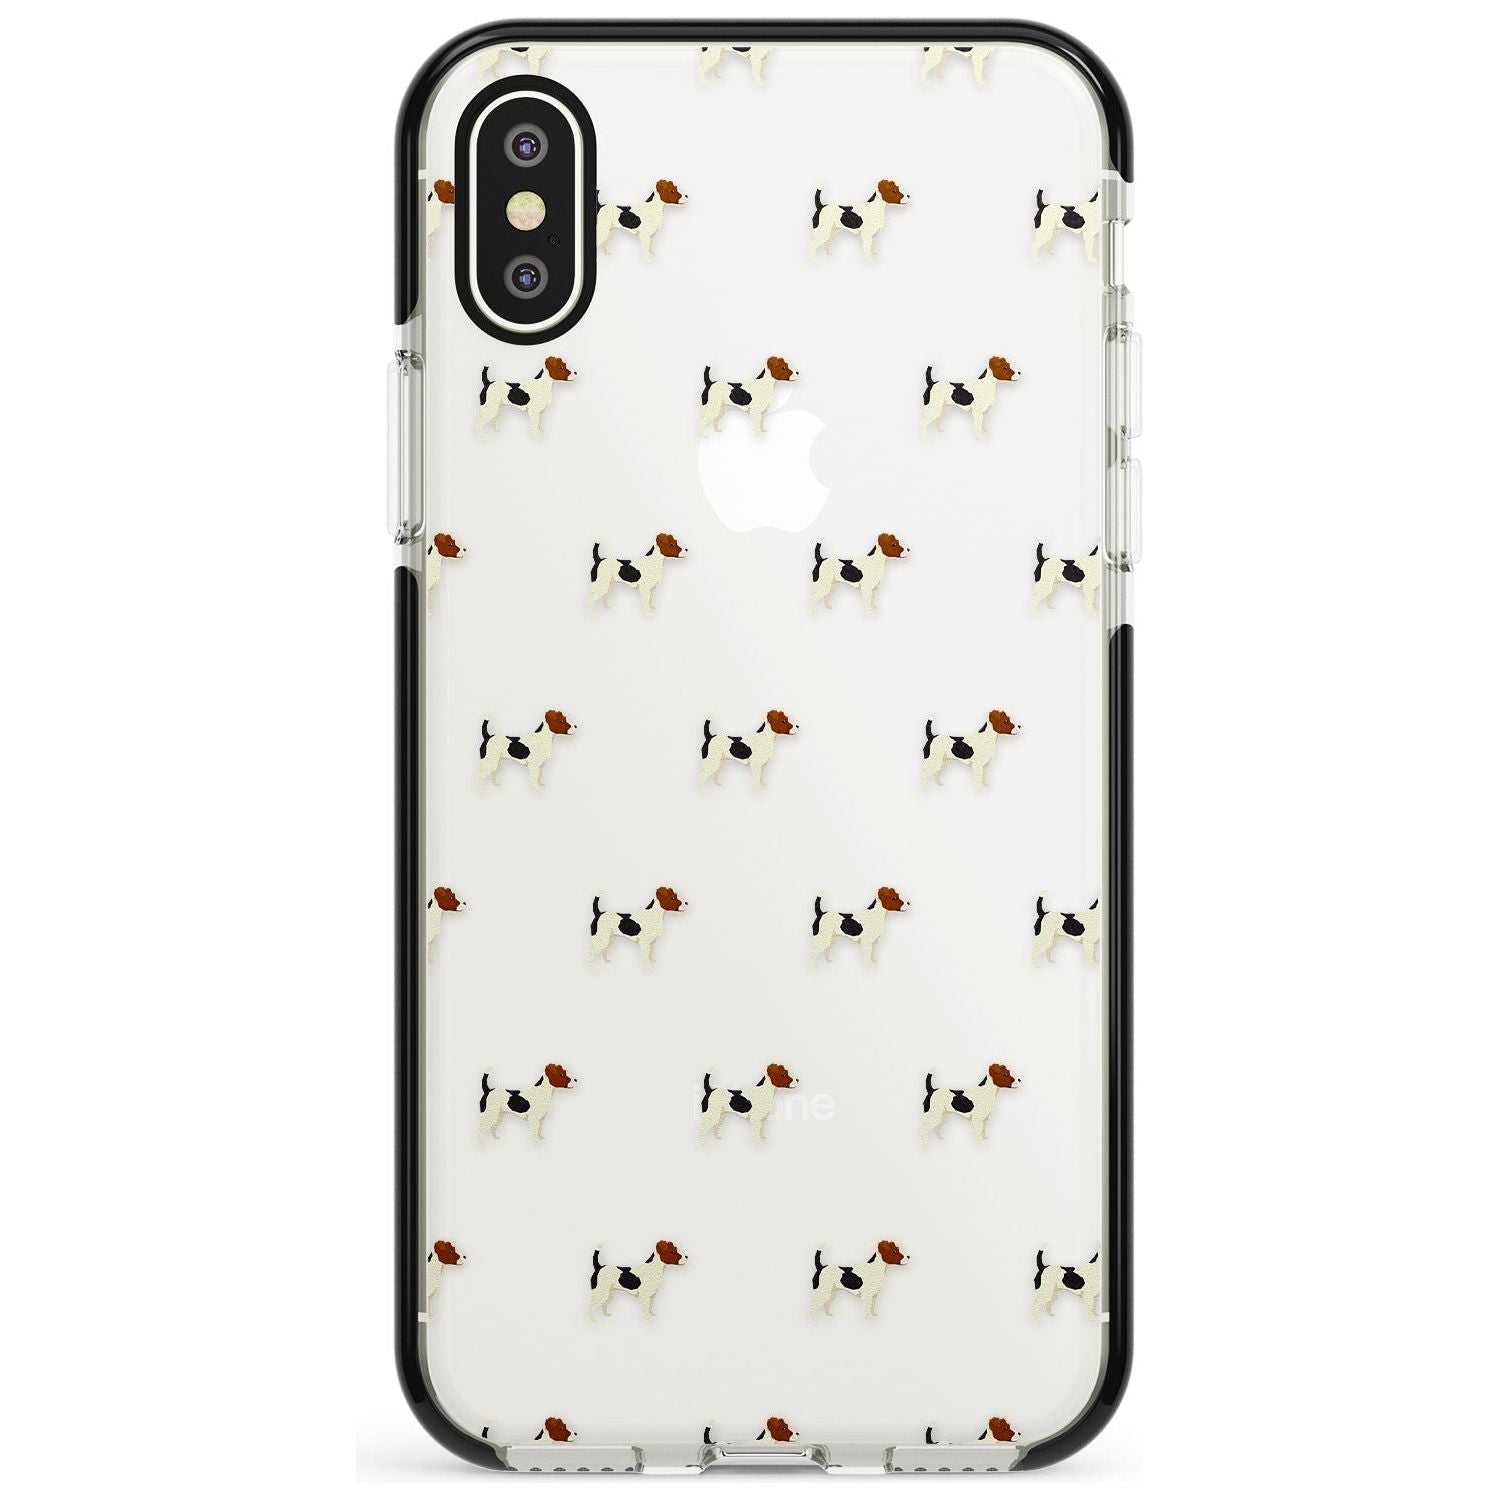 Jack Russell Terrier Dog Pattern Clear Black Impact Phone Case for iPhone X XS Max XR